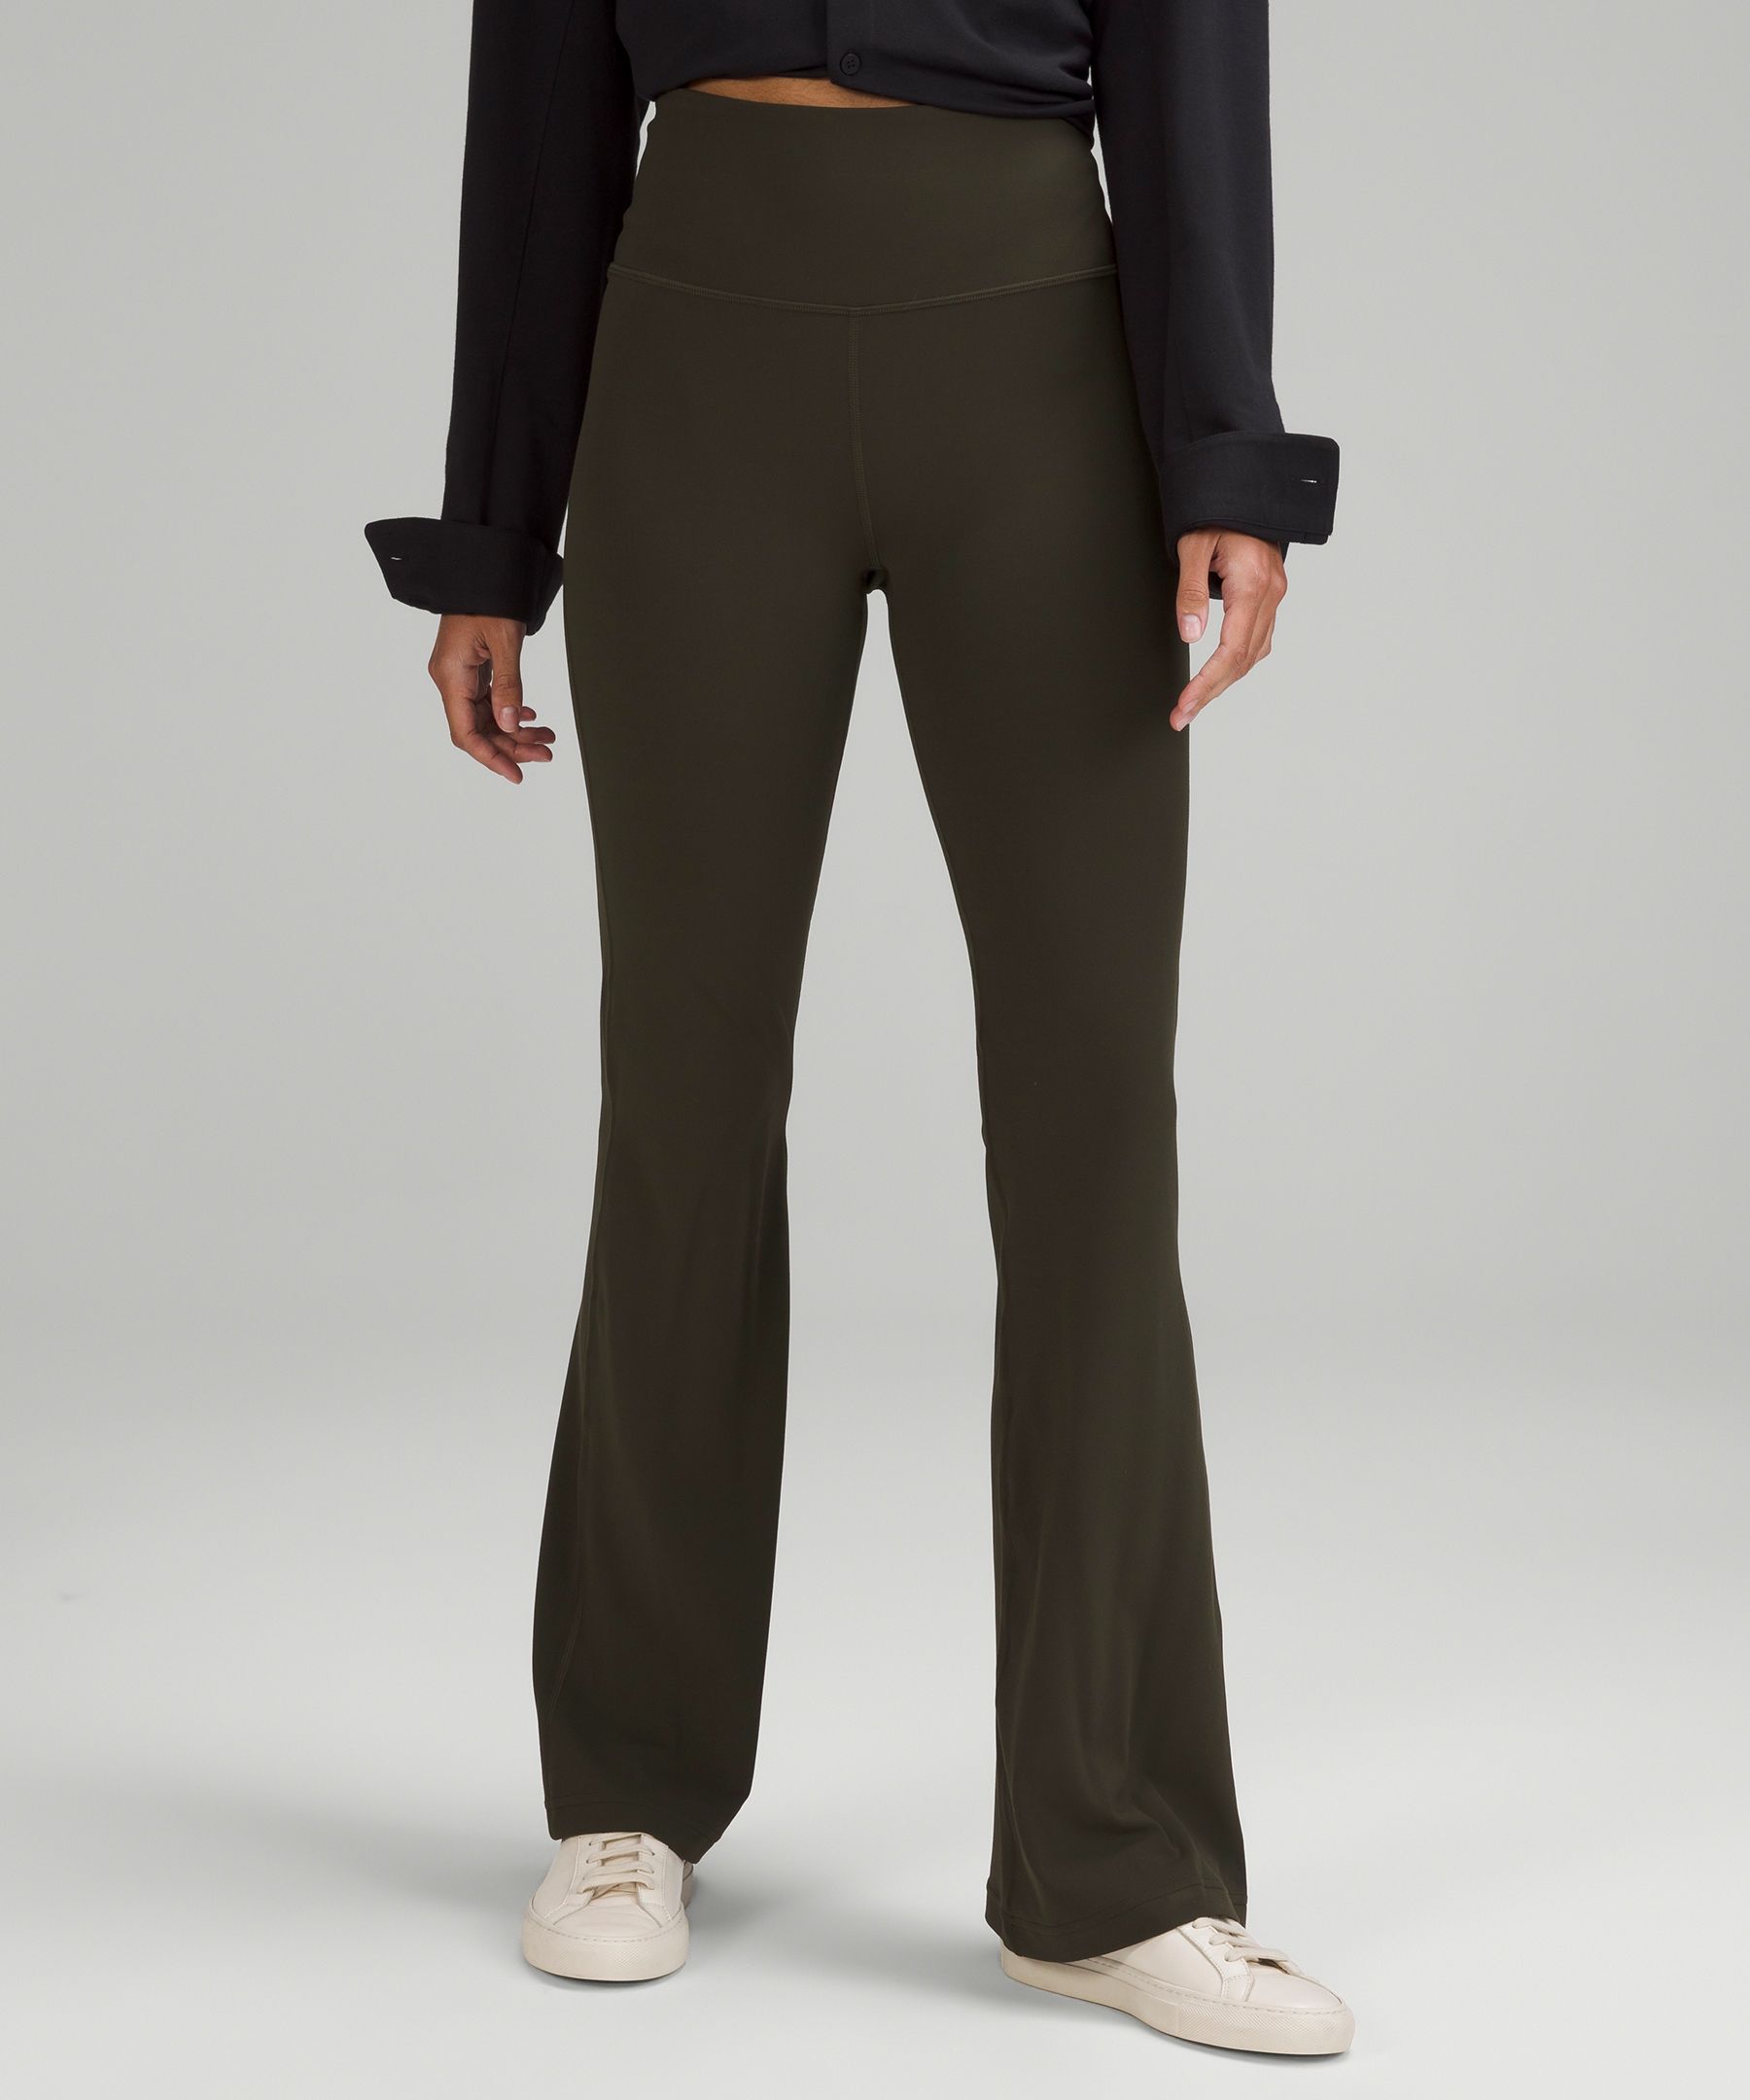 Insight to sizing on the Nulu Flare Pants? I'm 5'6”, 125 pounds : r